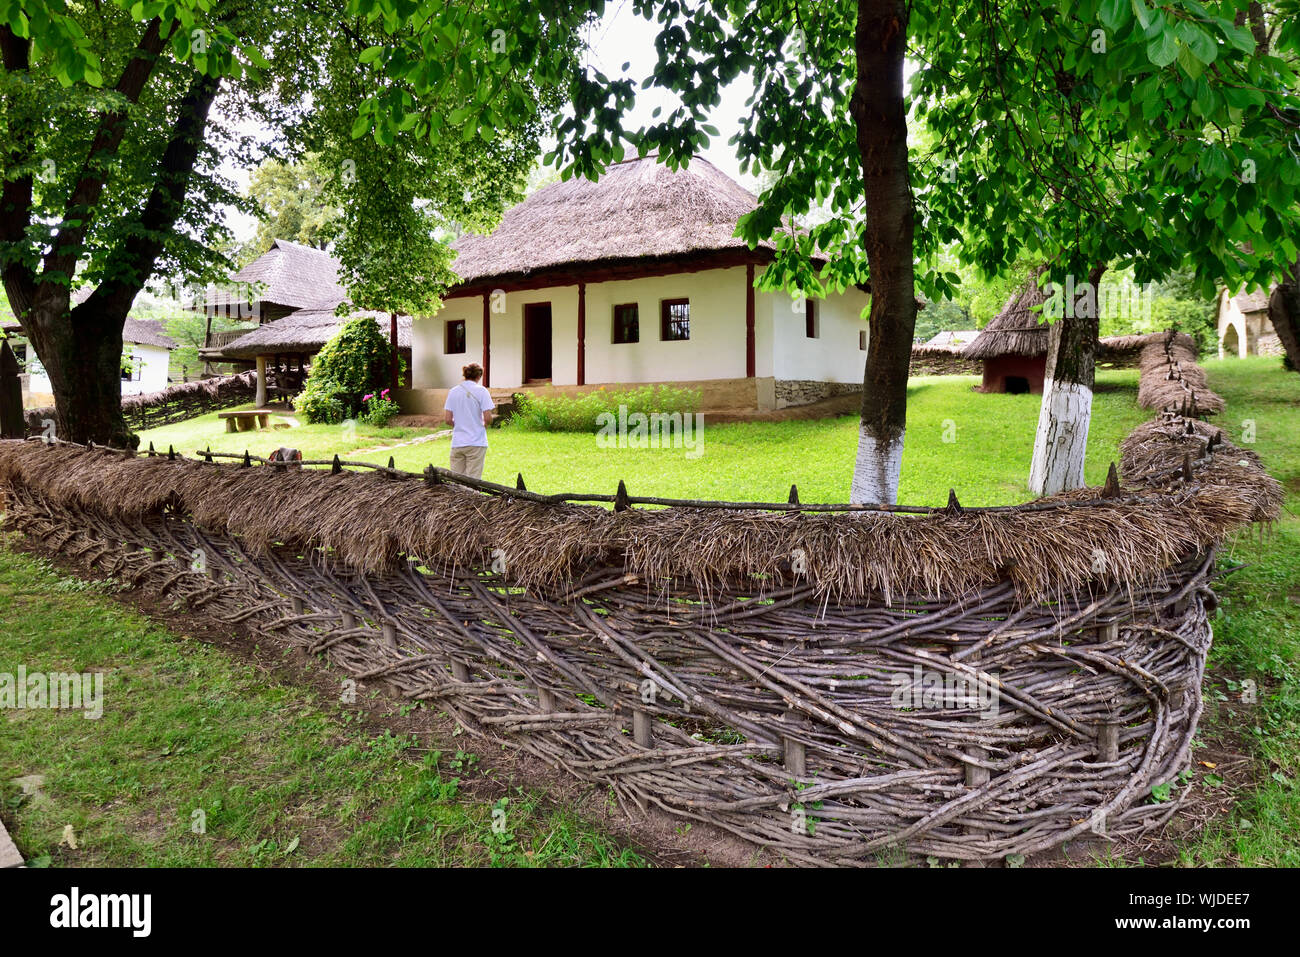 The National Village Museum, an open-air ethnographic museum showcasing 272 authentic peasant farms and houses from Romania. Bucharest Stock Photo